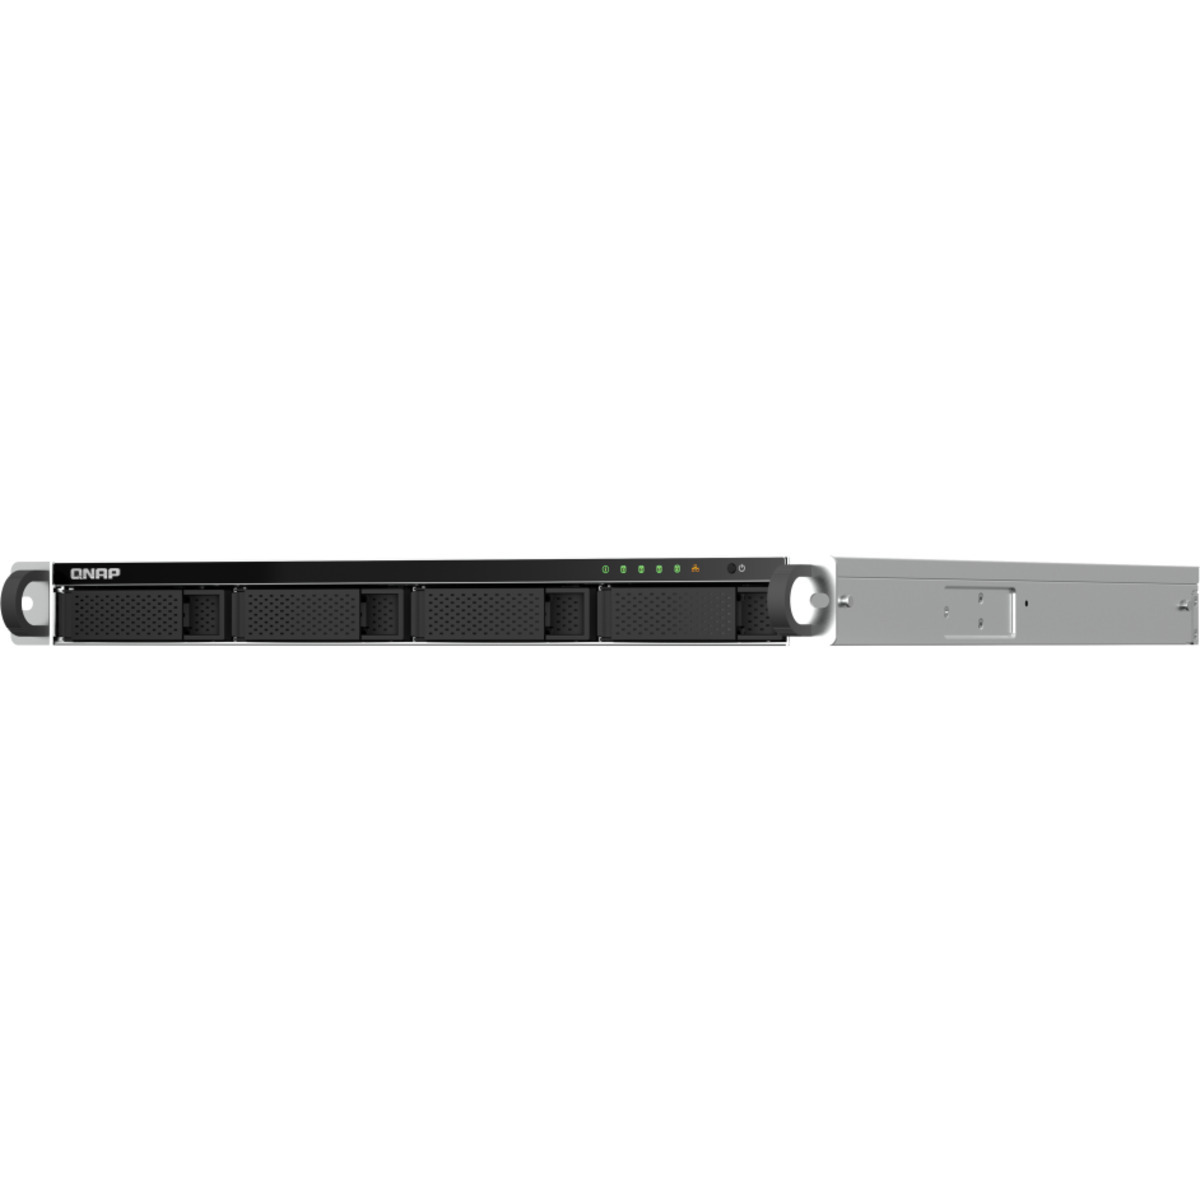 buy QNAP TS-464U 64tb RackMount NAS - Network Attached Storage Device 4x16000gb Seagate EXOS X18 ST16000NM000J 3.5 7200rpm SATA 6Gb/s HDD ENTERPRISE Class Drives Installed - Burn-In Tested - nas headquarters buy network attached storage server device das new raid-5 free shipping usa spring sale TS-464U